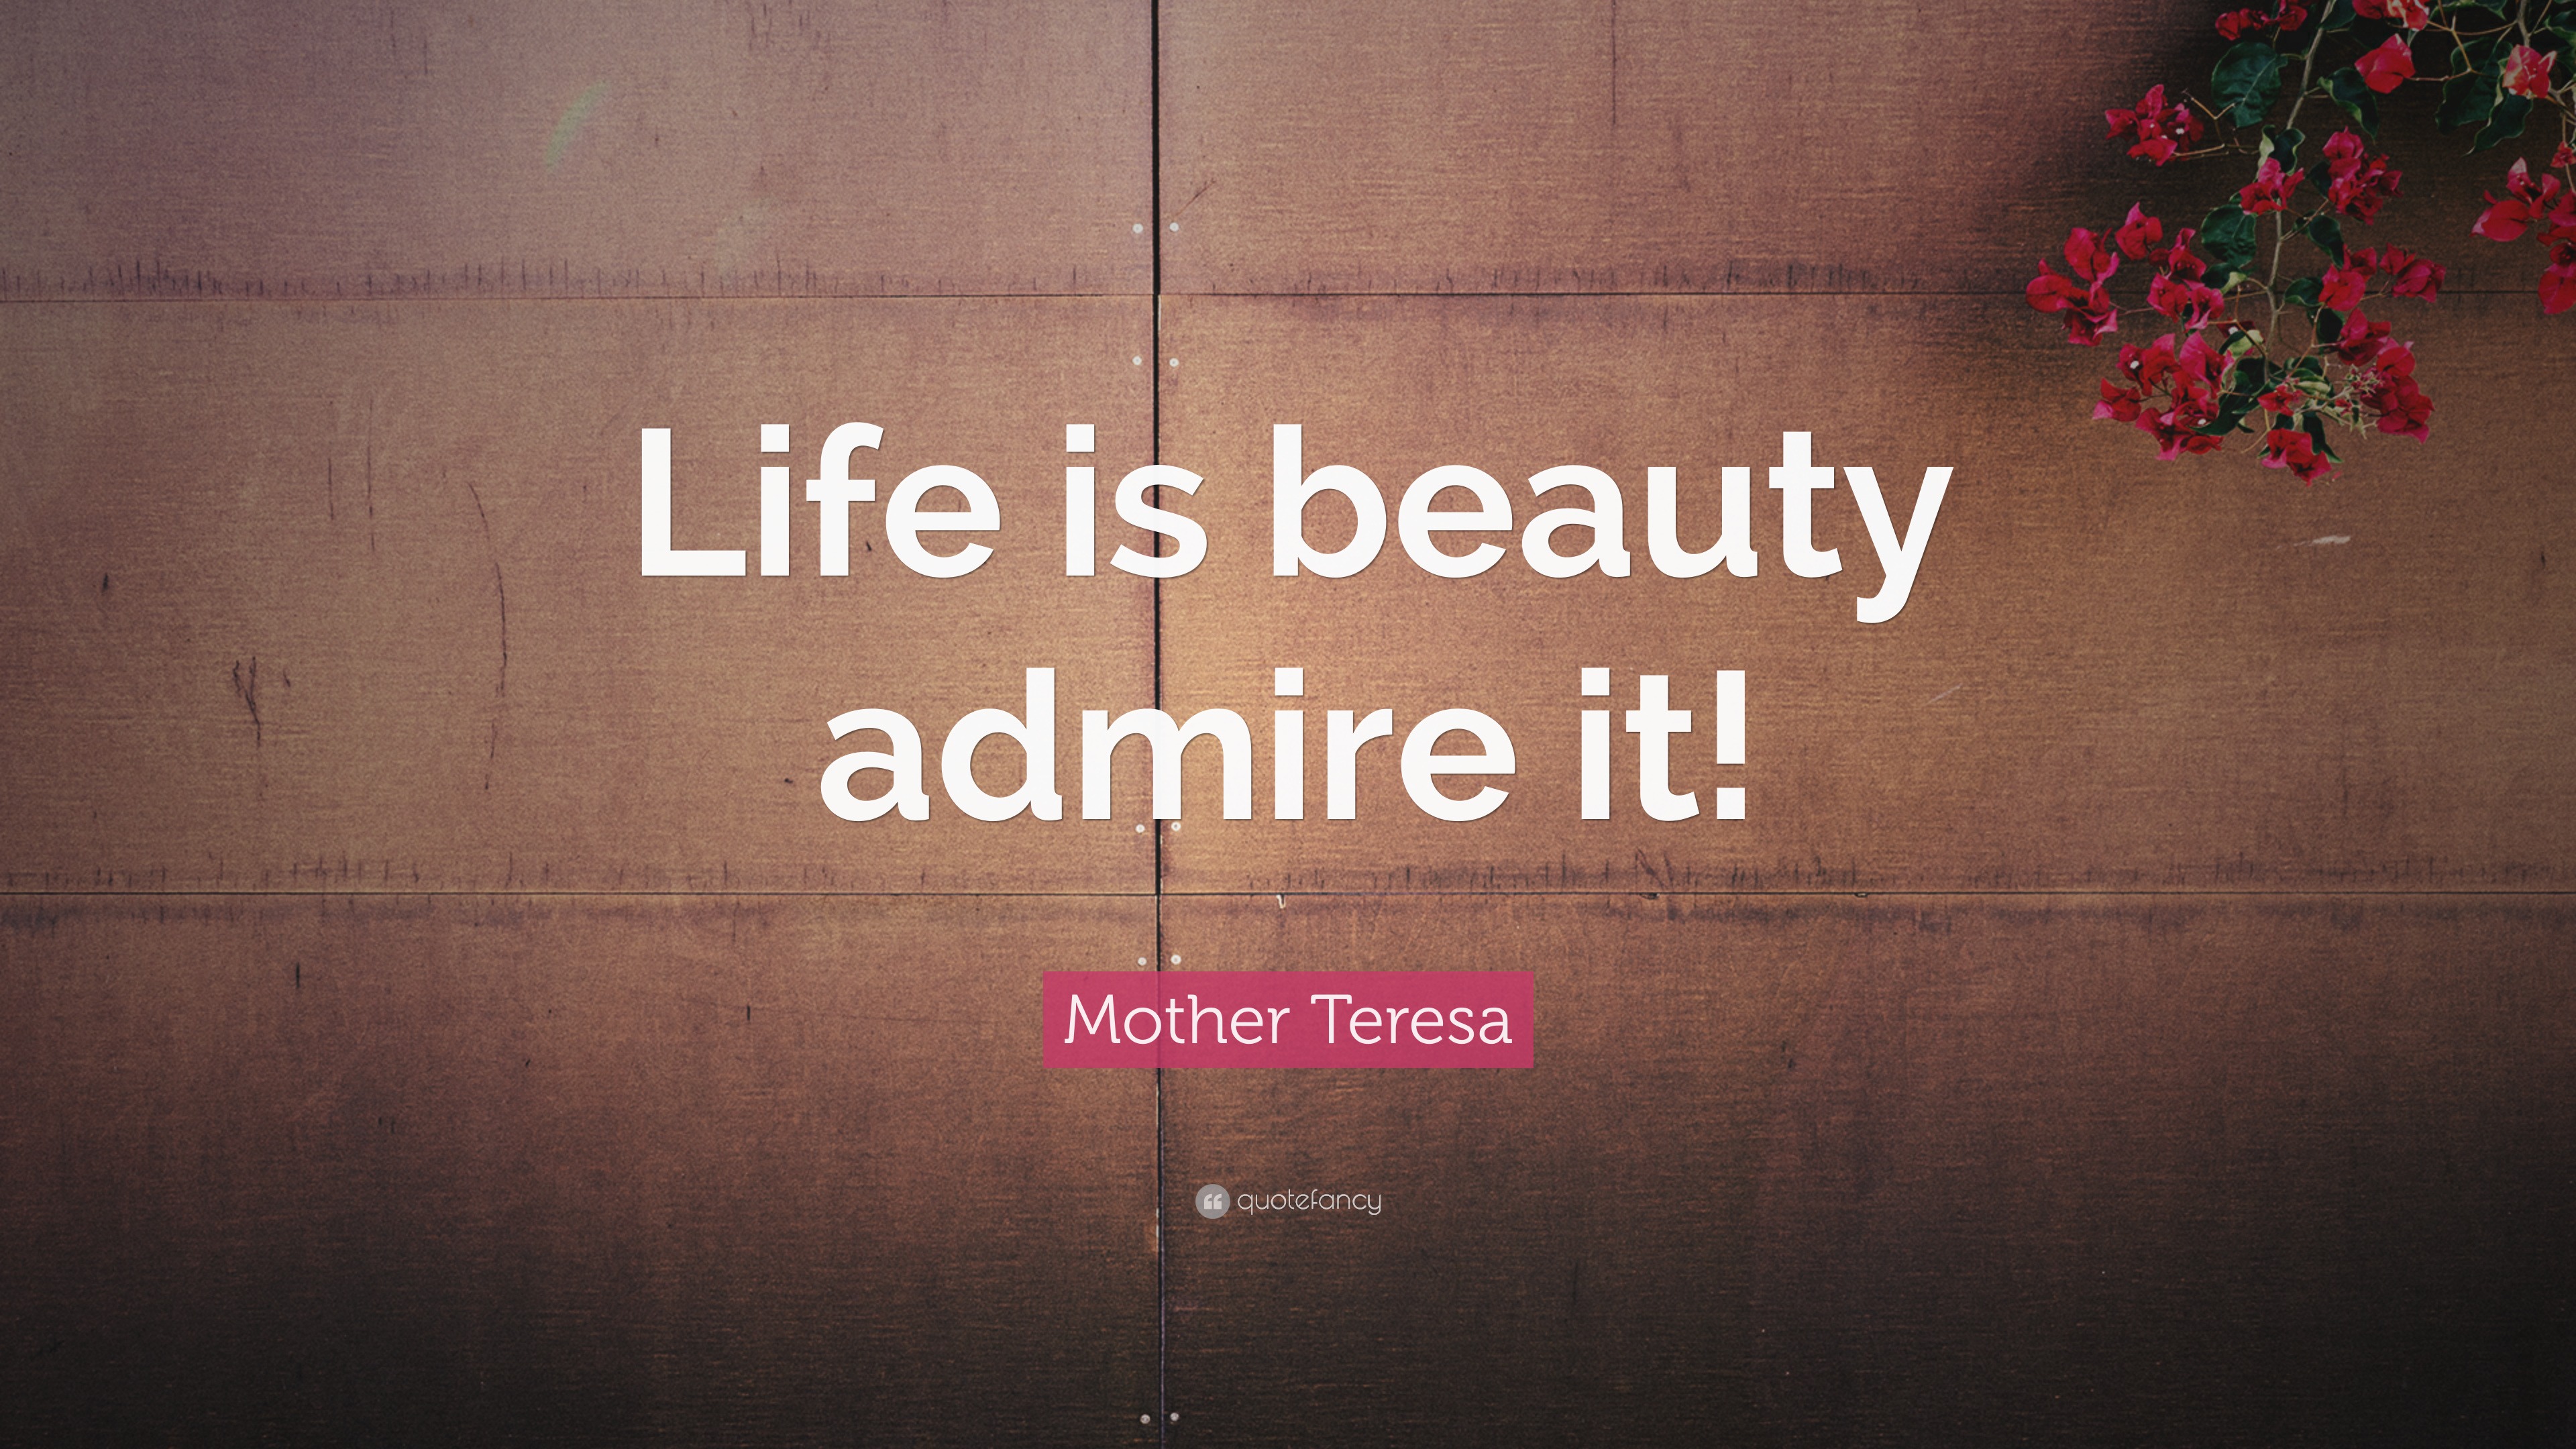 Mother Teresa Quote “Life is beauty admire it ”